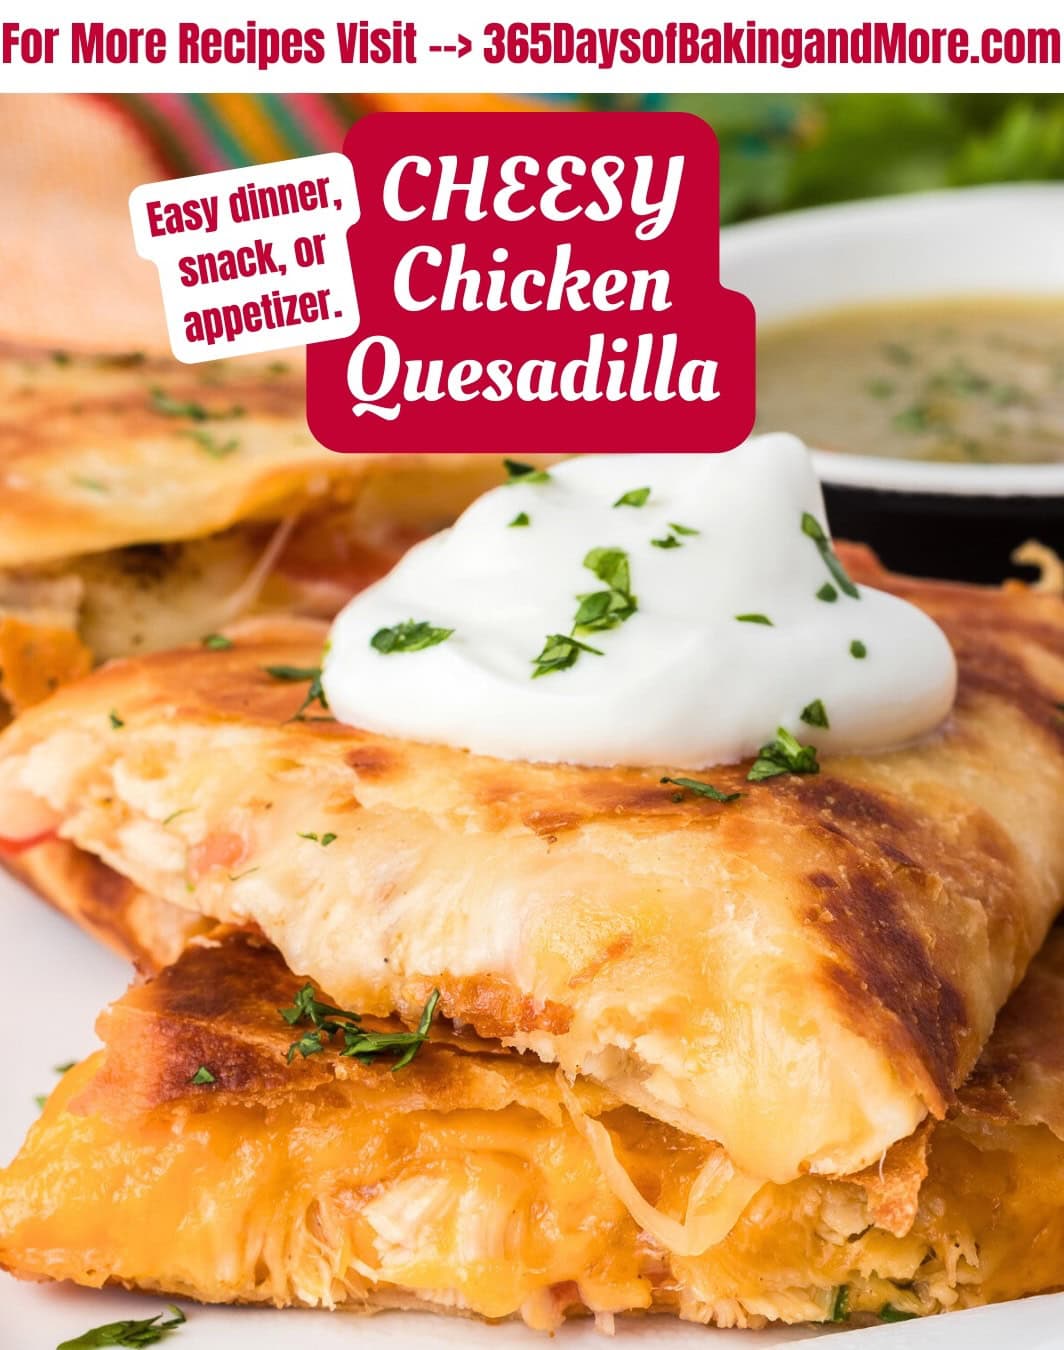 A close-up image of a cheesy chicken quesadilla topped with a dollop of sour cream and sprinkled with chopped herbs, perfect for busy families. Find more easy dinner ideas at 